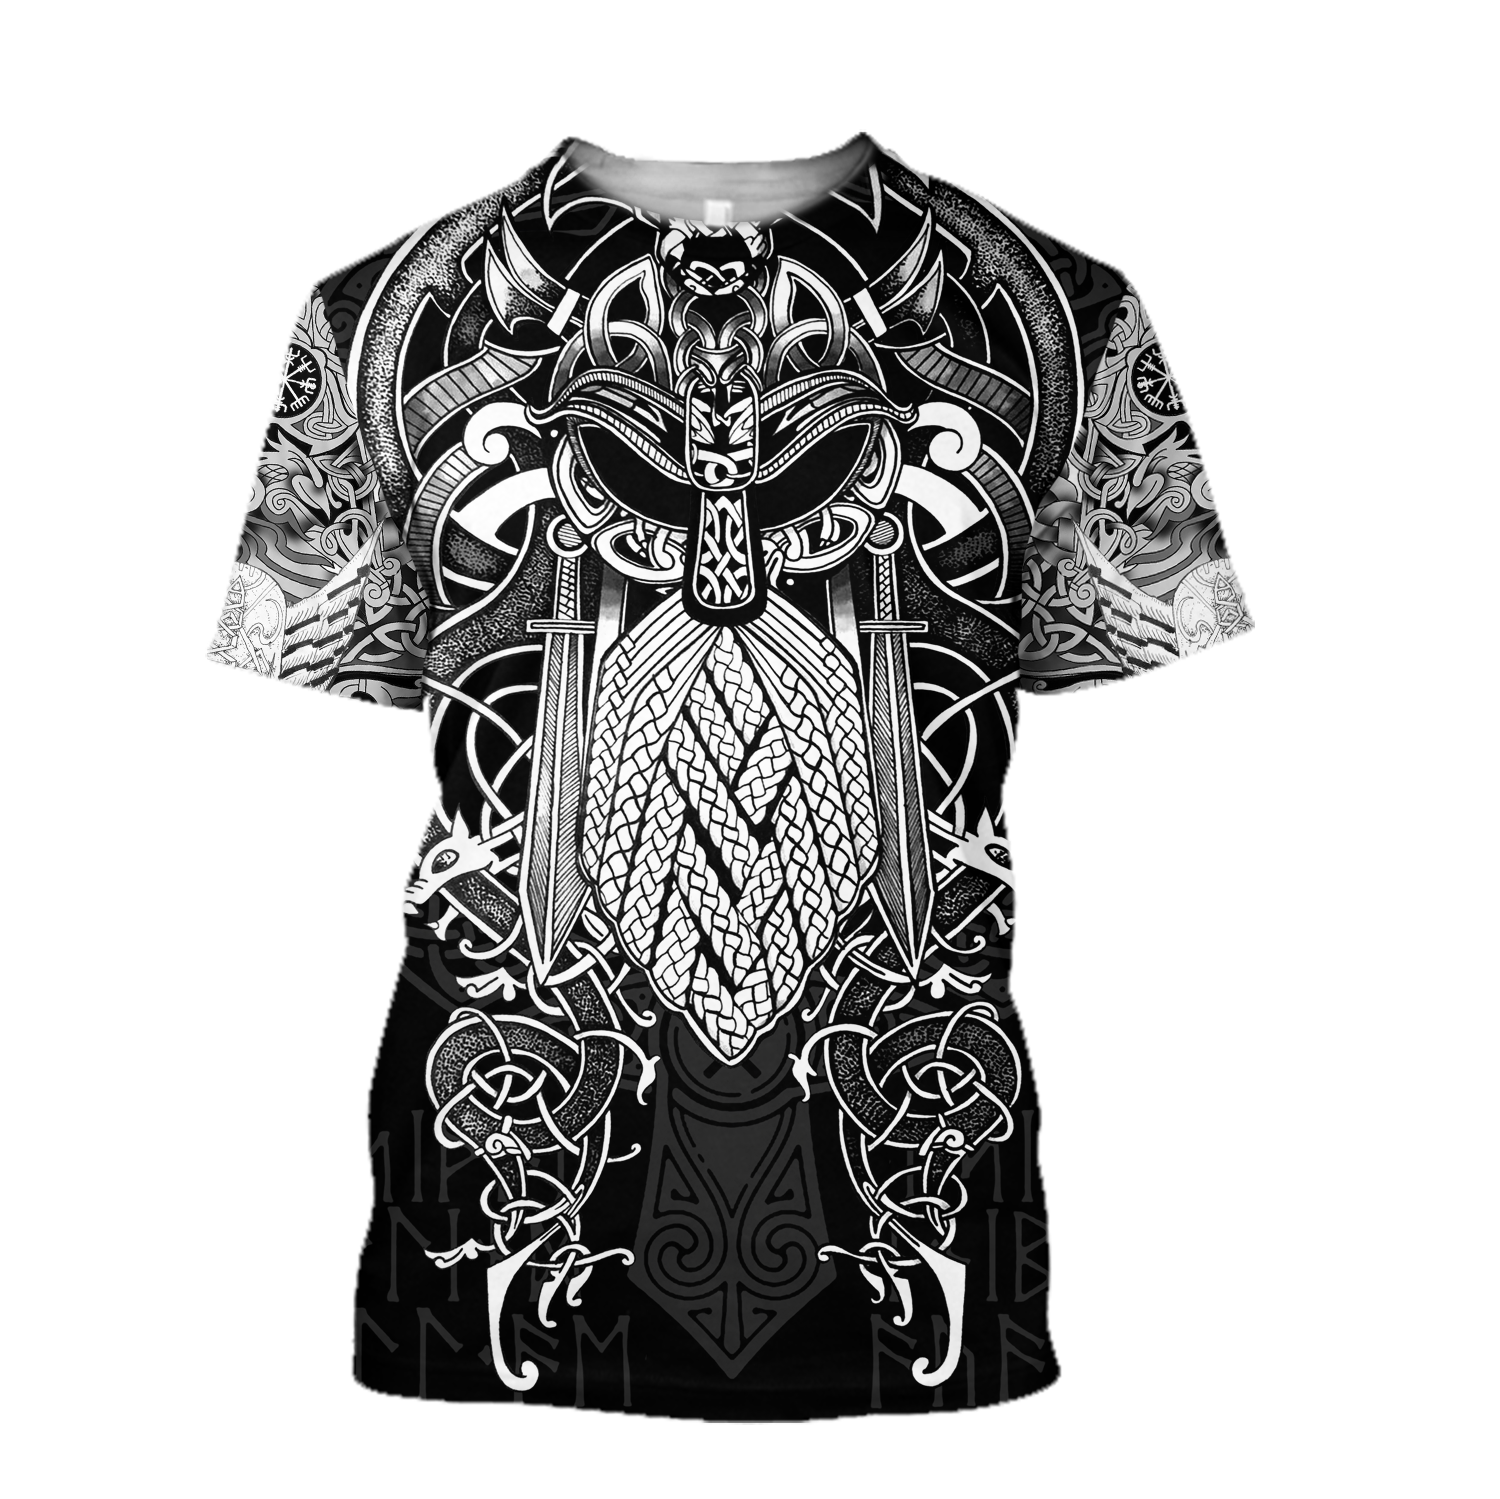 COLLECTION VIKING TATTOO STYLE - HOOD01DUC010222 - Home Decor, Apparel and Accessories, Print on ...